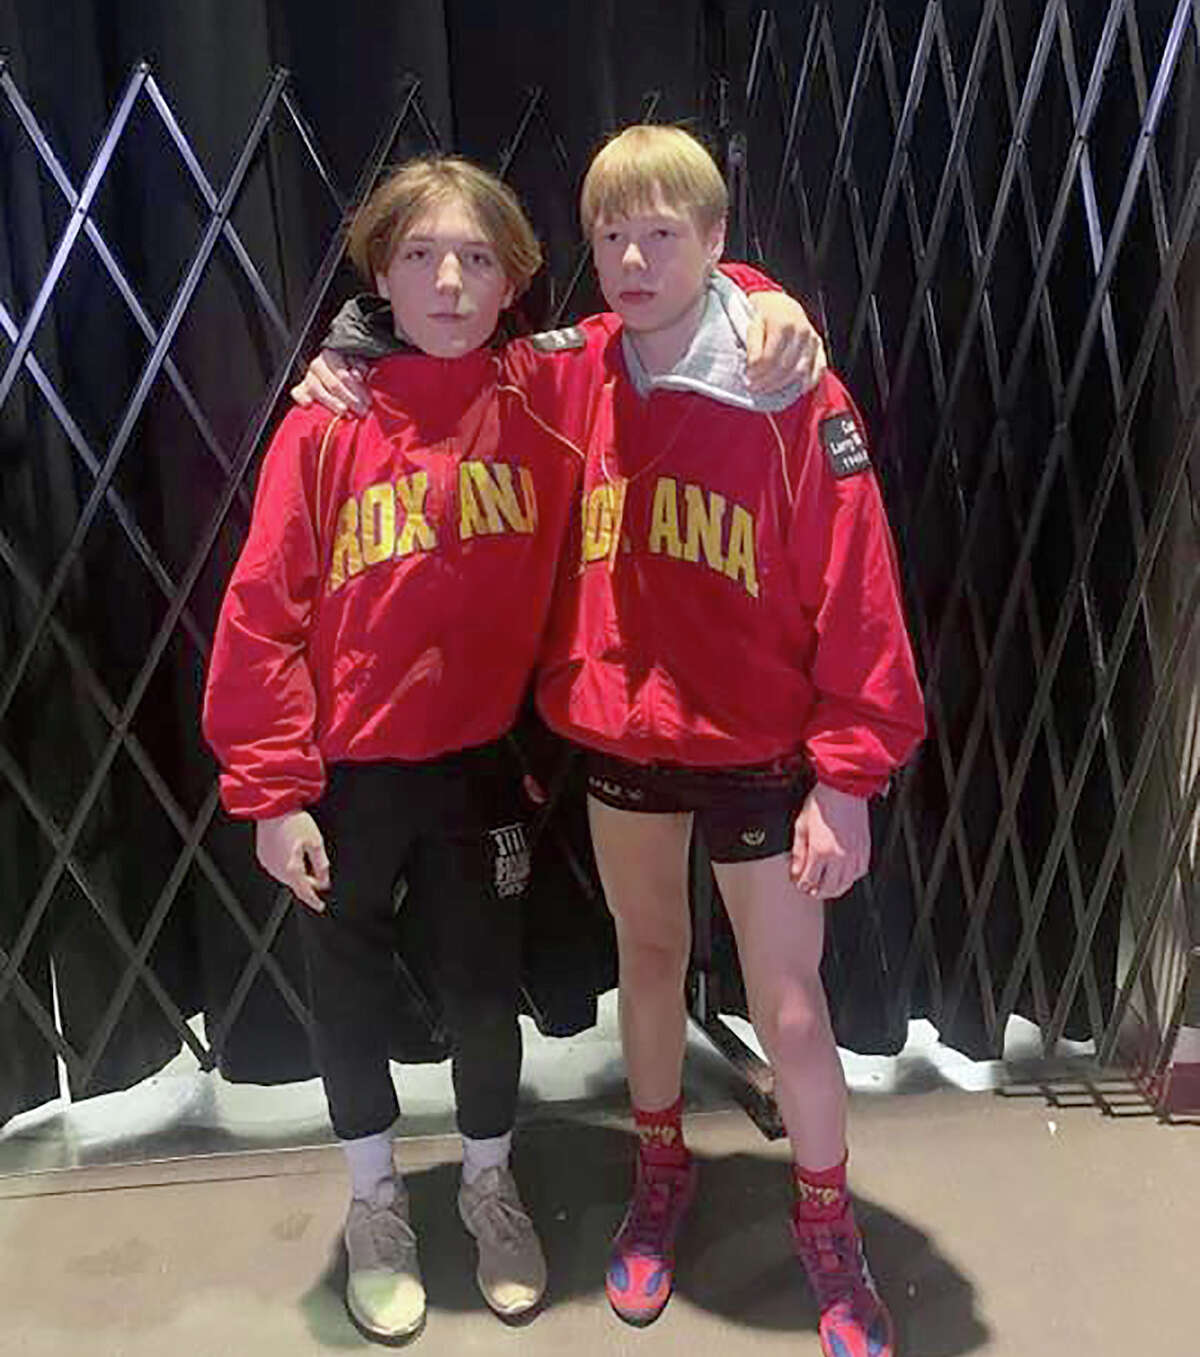 Roxana state finalists Brandon Green, left, and teammate Lyndon Thies pause at the IESA State Wrestling Championships Saturday at Northern Illinois University in DeKalb. Green captured the Class A state championship at 119 pounds and Thies was second at 126 pounds.